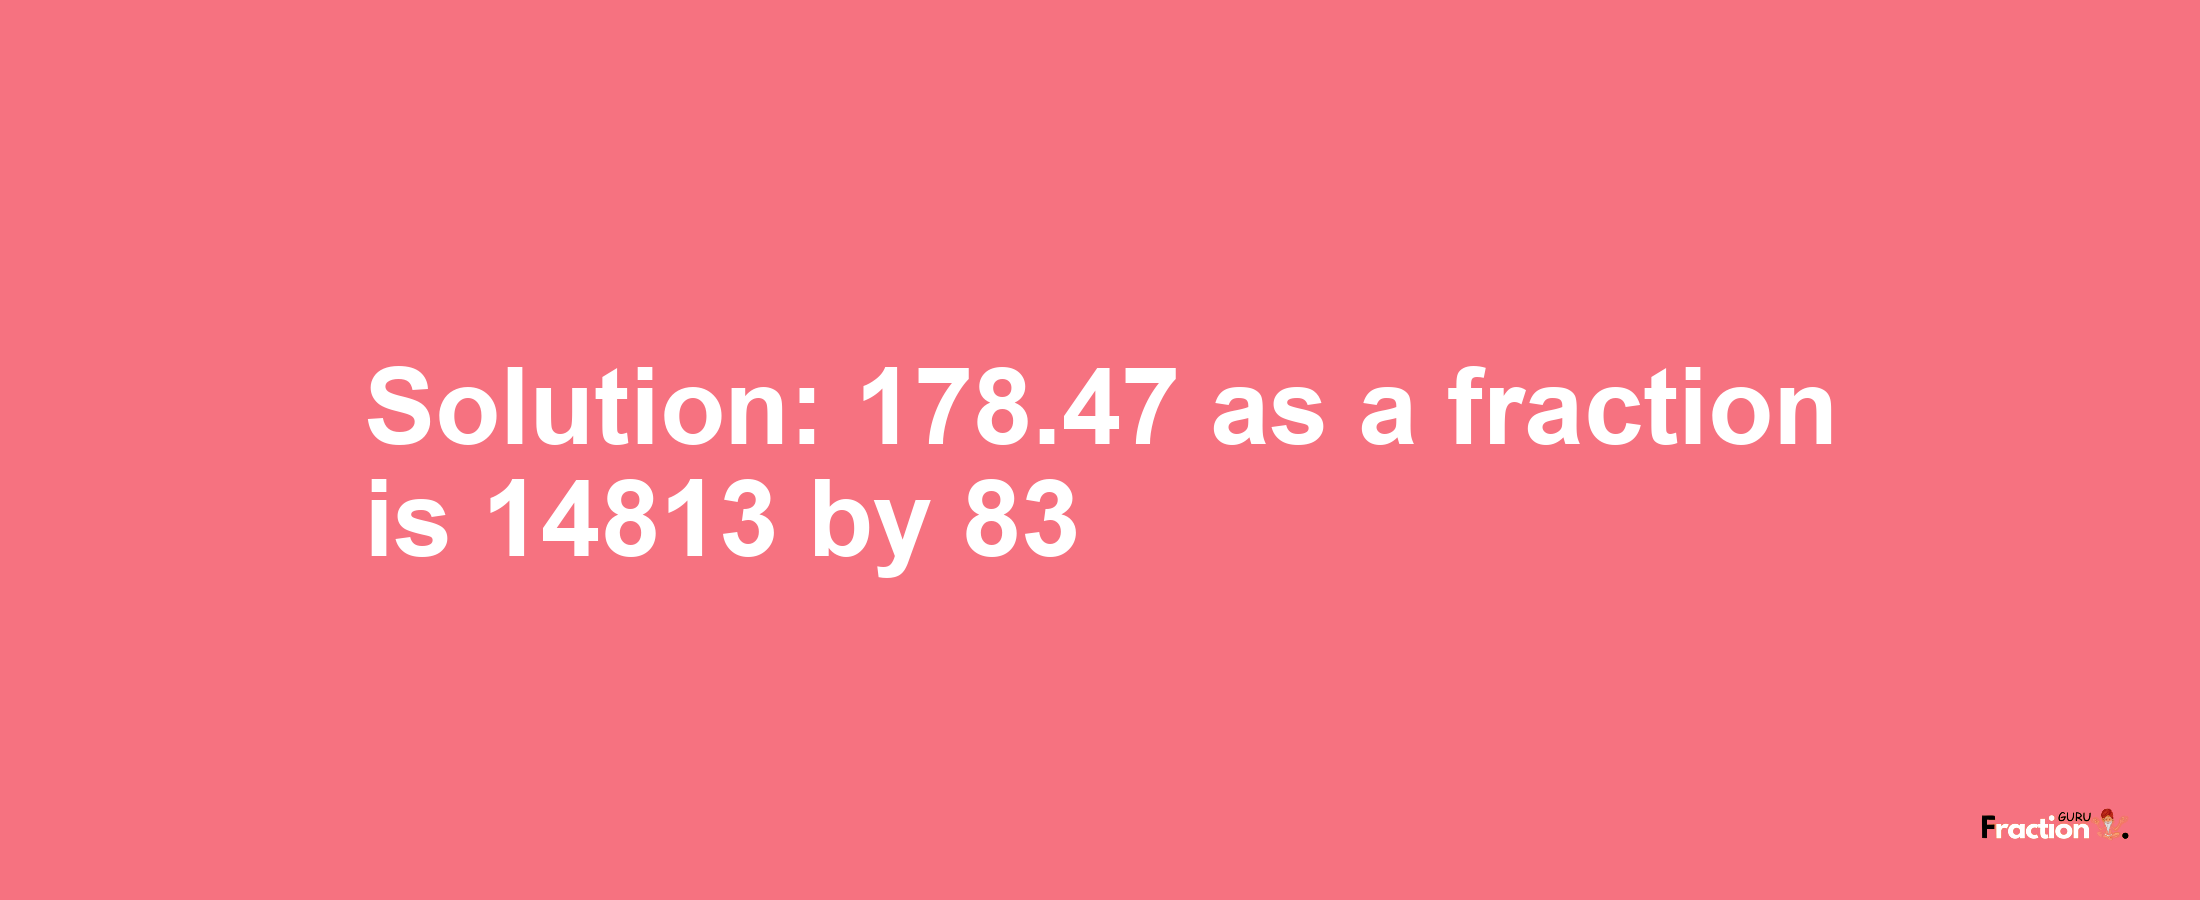 Solution:178.47 as a fraction is 14813/83